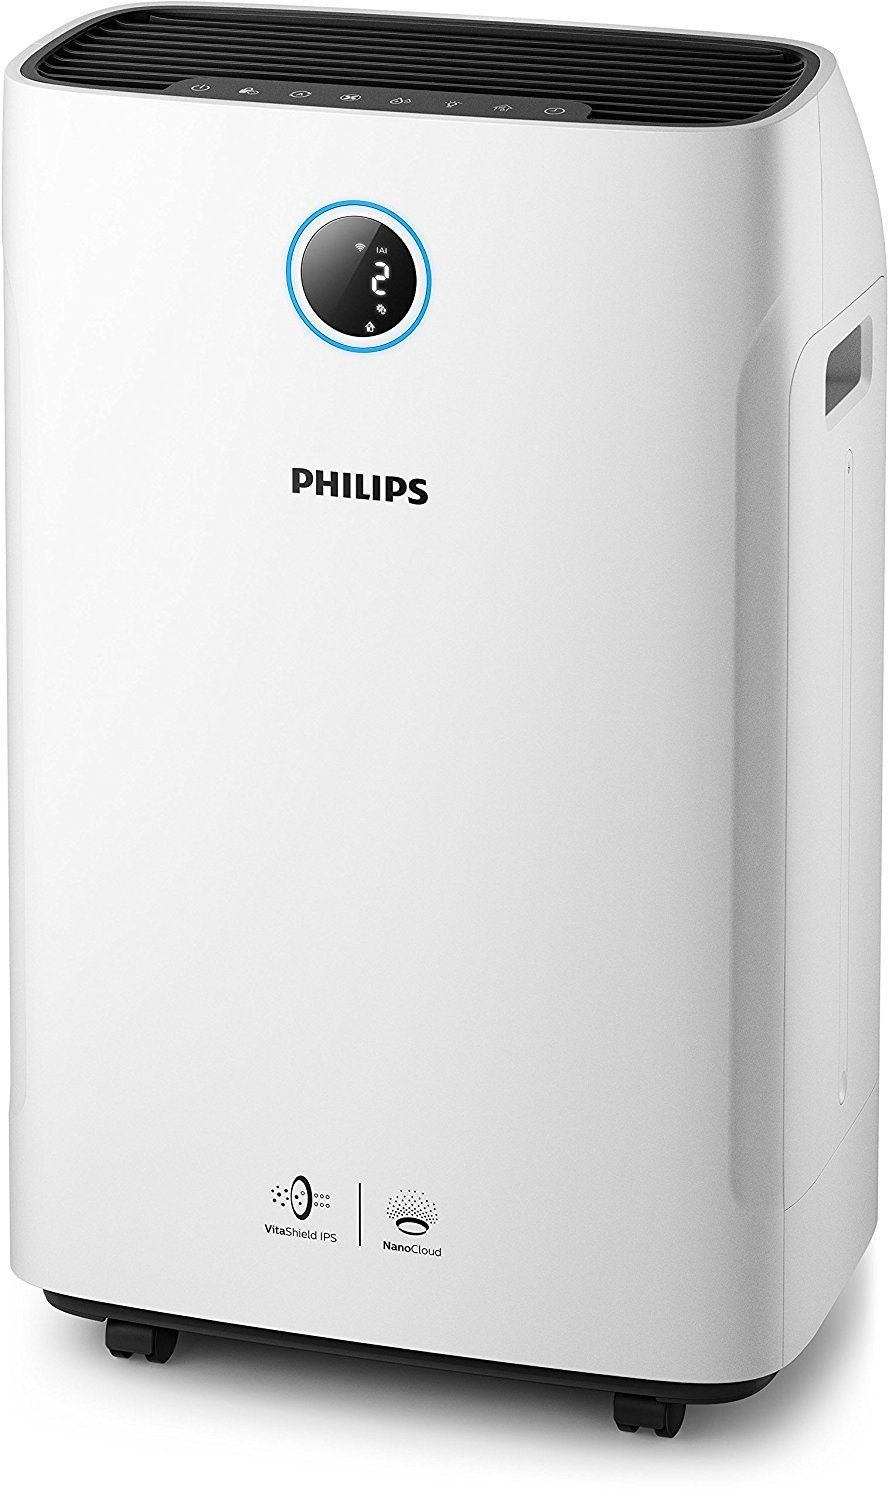 Philips 2-in-1 Air Purifier and Humidifier Series 3000/4000 featured image